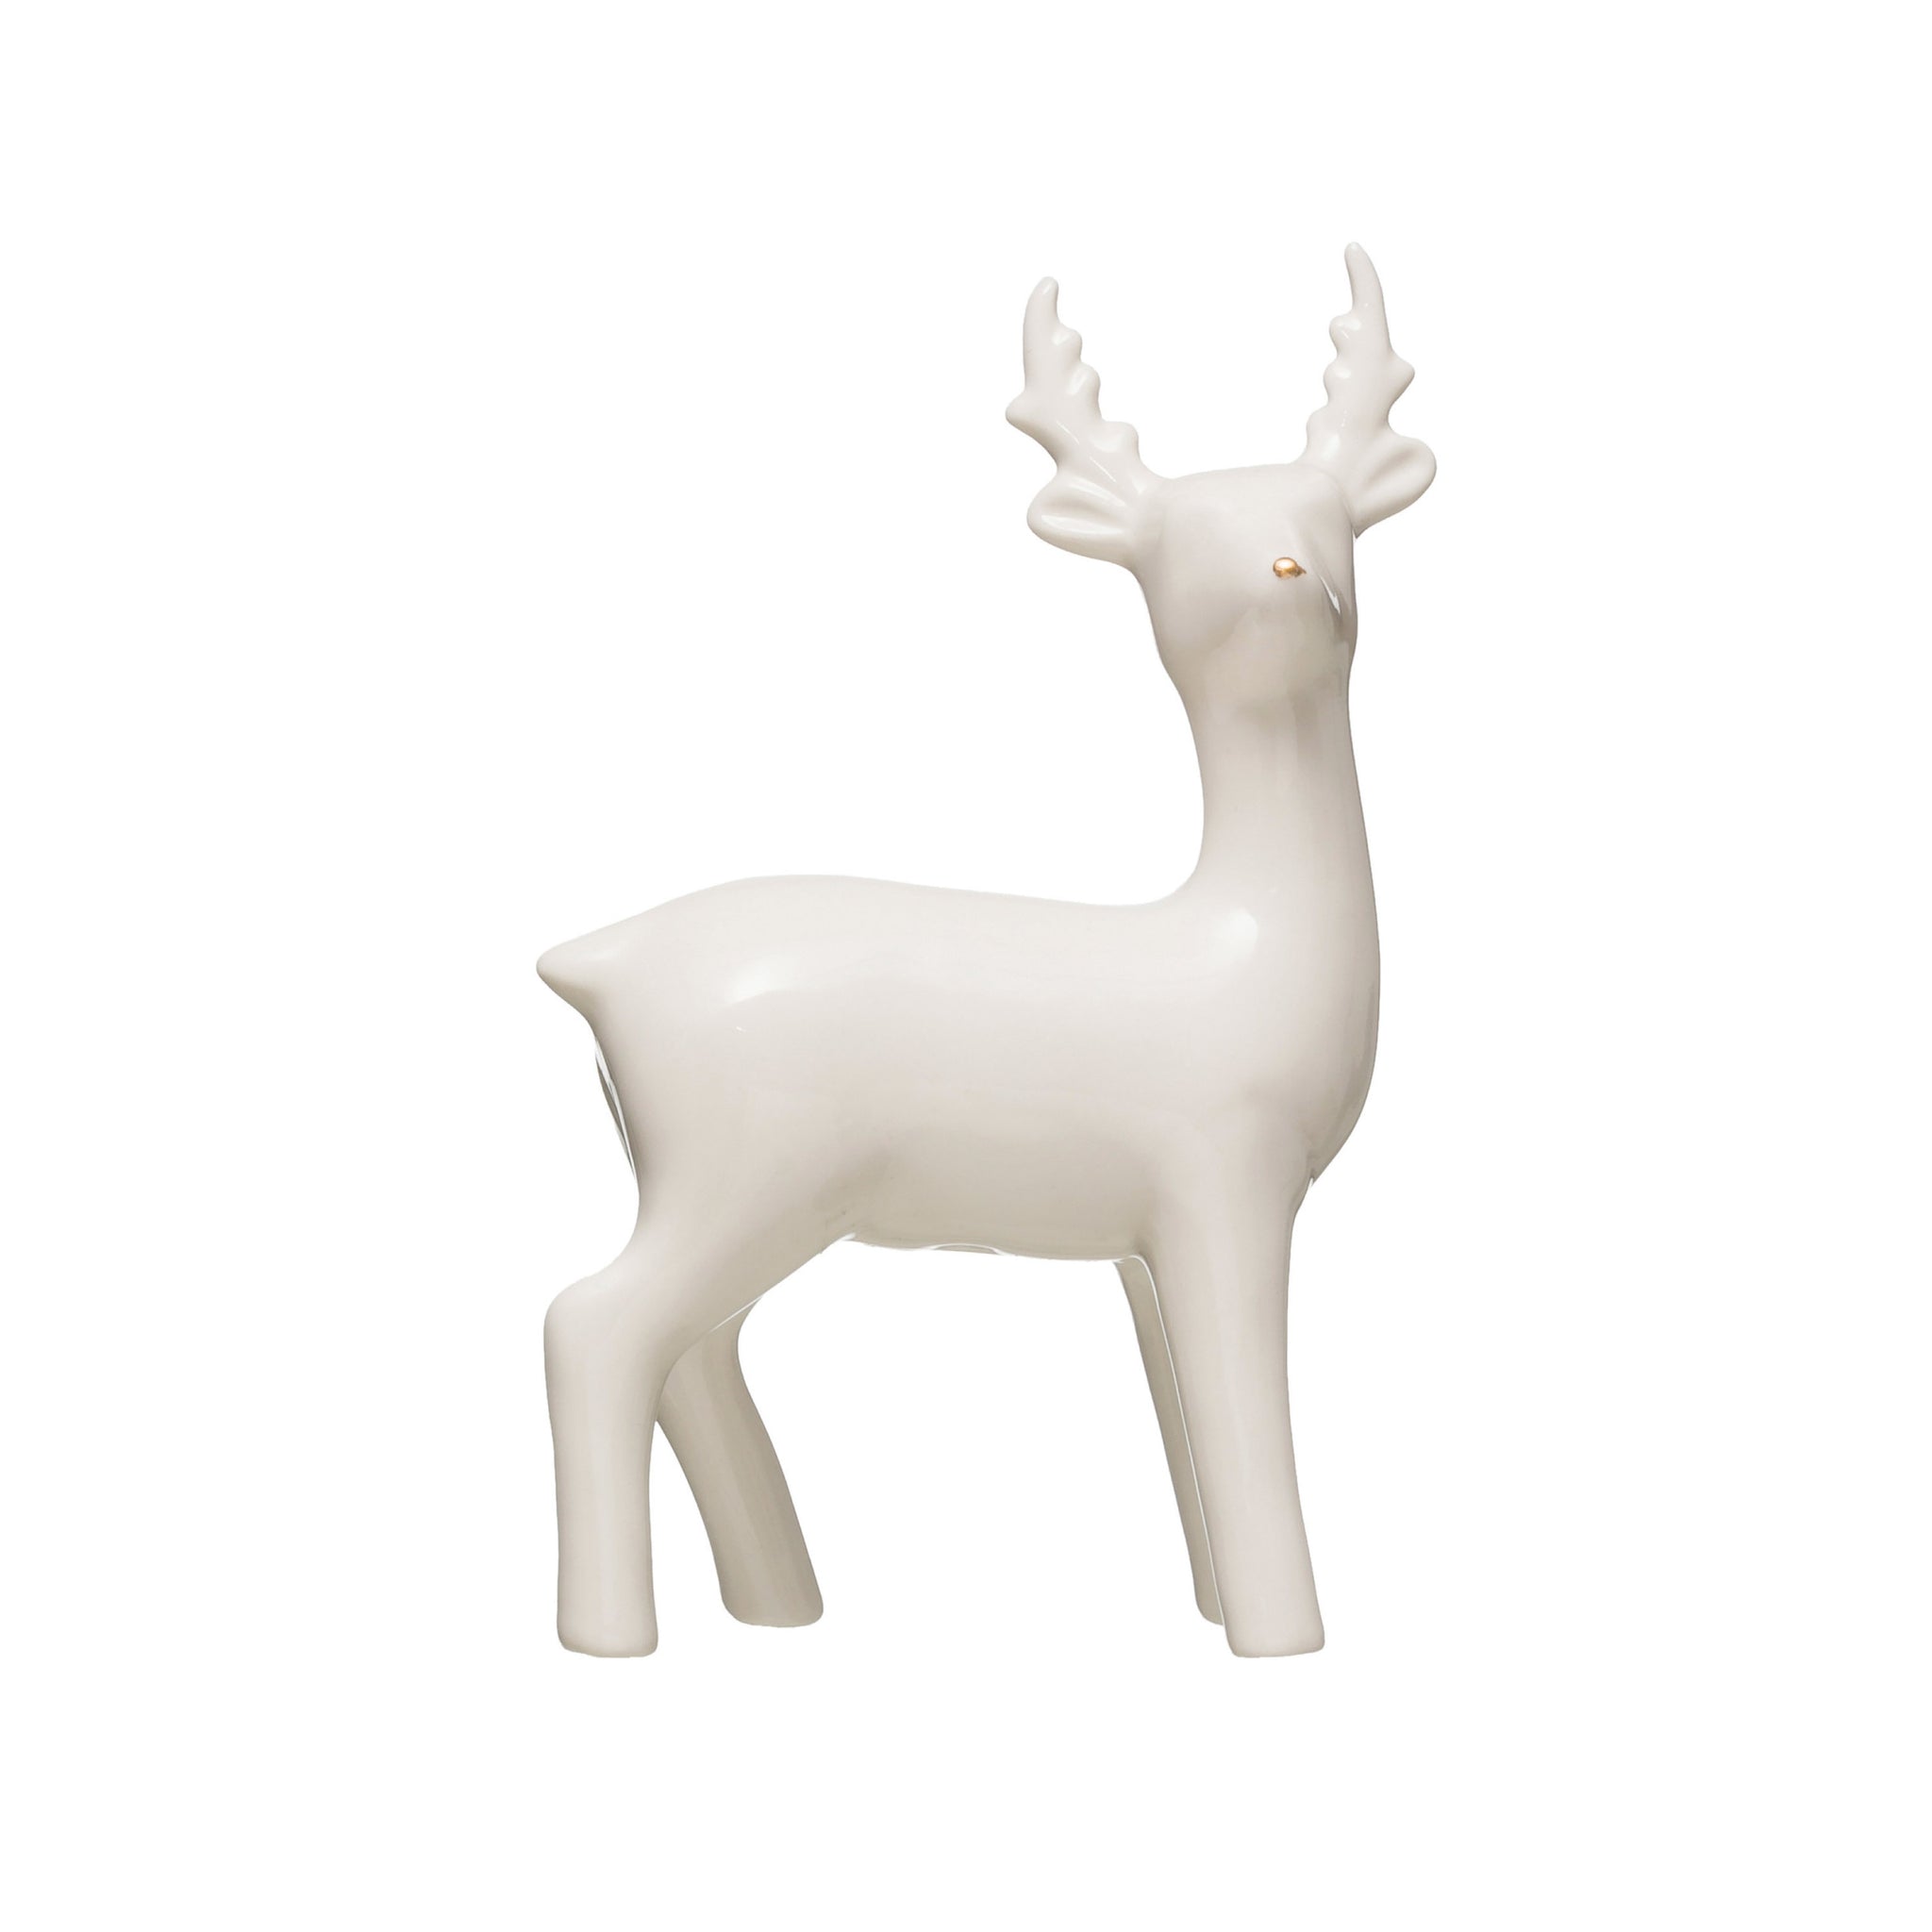 White ceramic reindeer with gold eloctroplated nose in a clean modern design. 6in.H